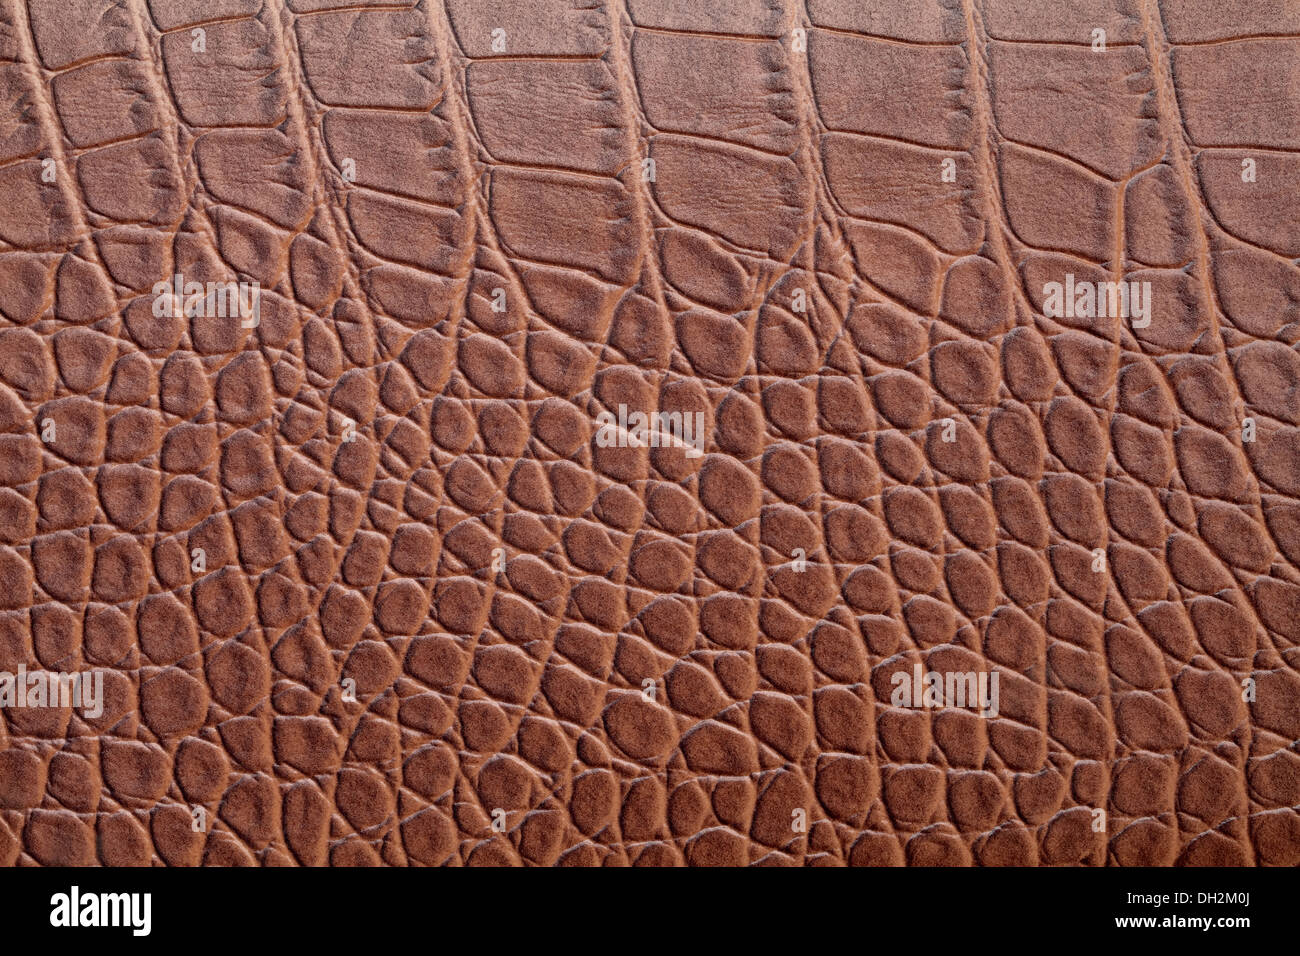 Red Crocodile Skin Texture As A Wallpaper Stock Photo, Picture and Royalty  Free Image. Image 13728818.